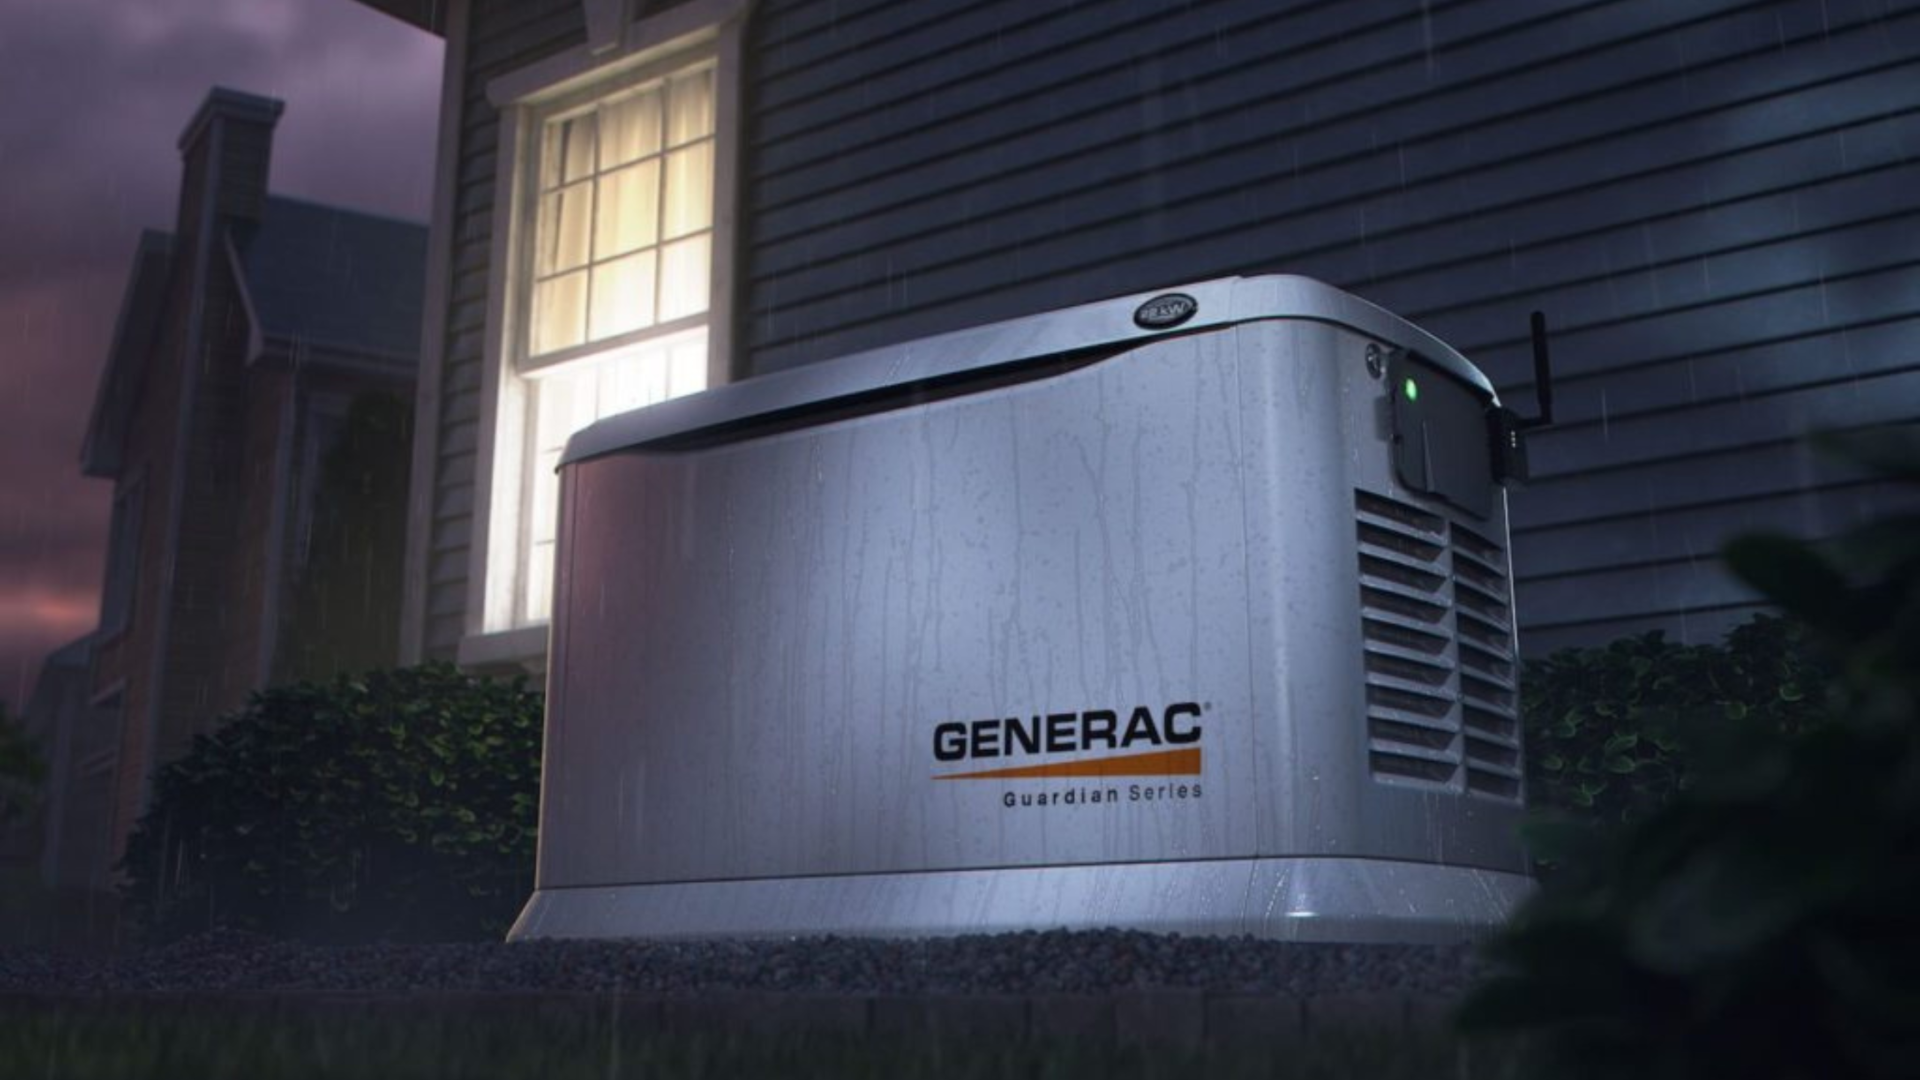 Pros & Cons Of Having A Home Standby Generator